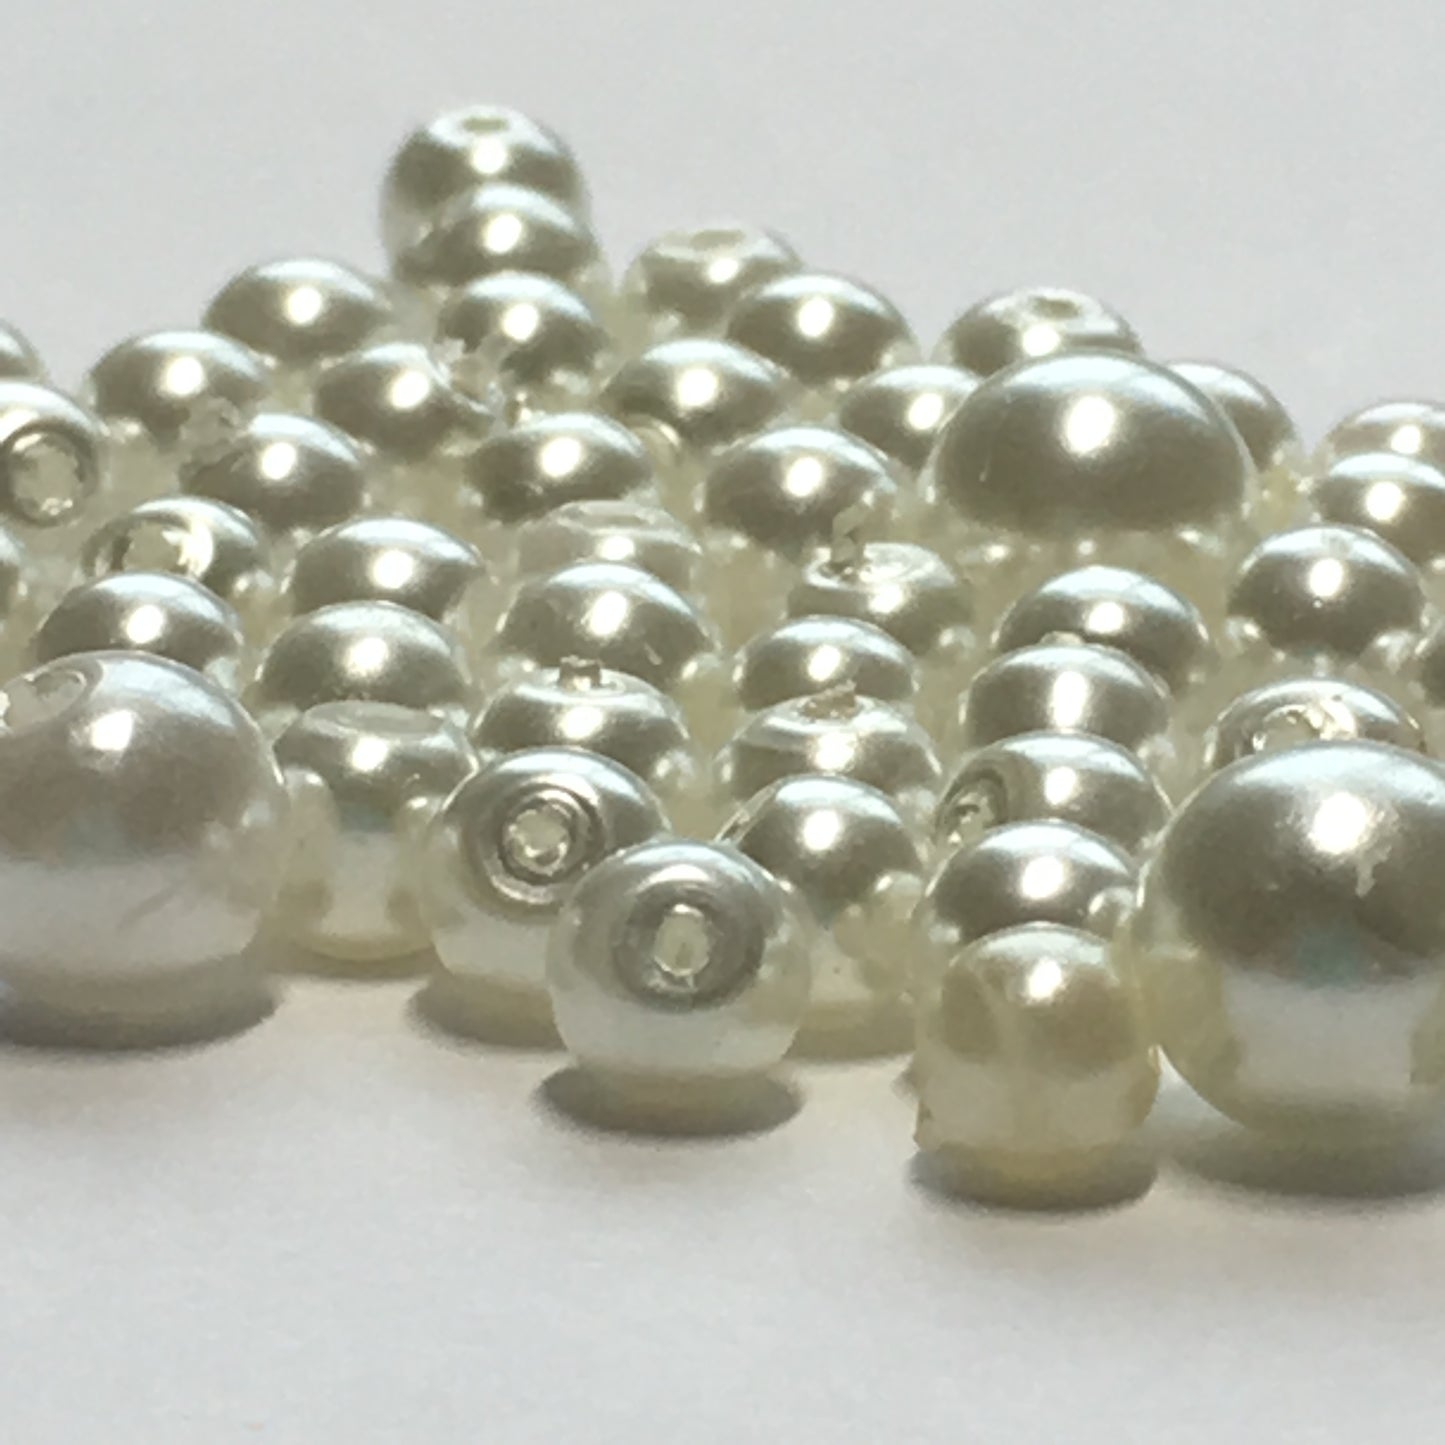 White Round Acrylic Pearls, 4 mm and 6 mm - 69 Beads